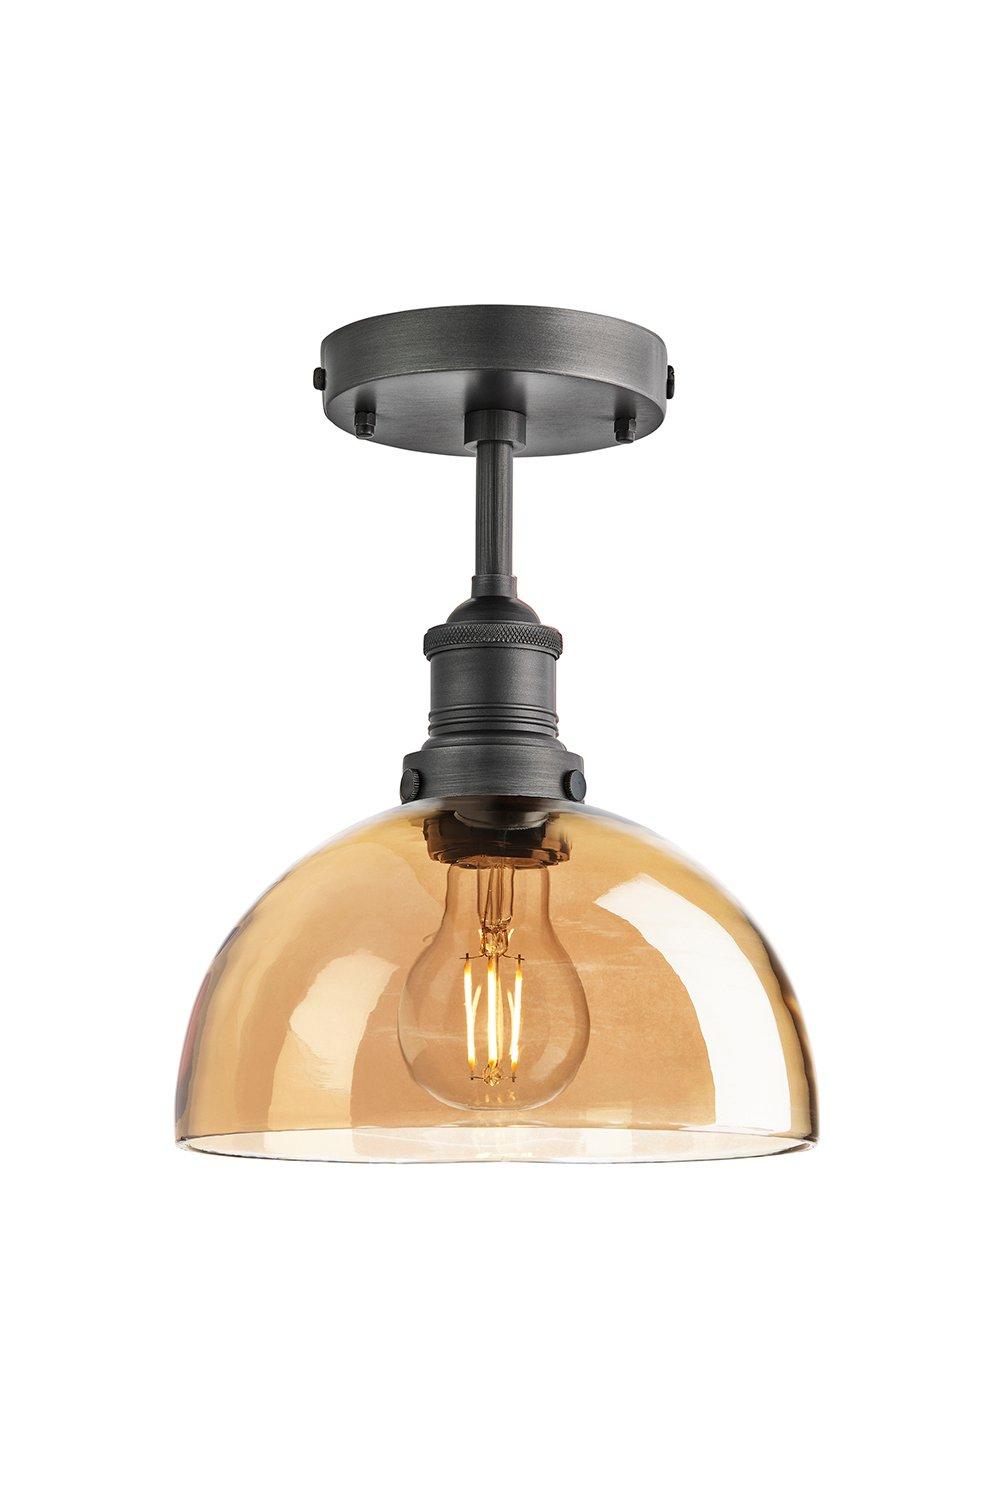 Brooklyn Tinted Glass Dome Flush Mount, 8 Inch, Amber, Pewter Holder